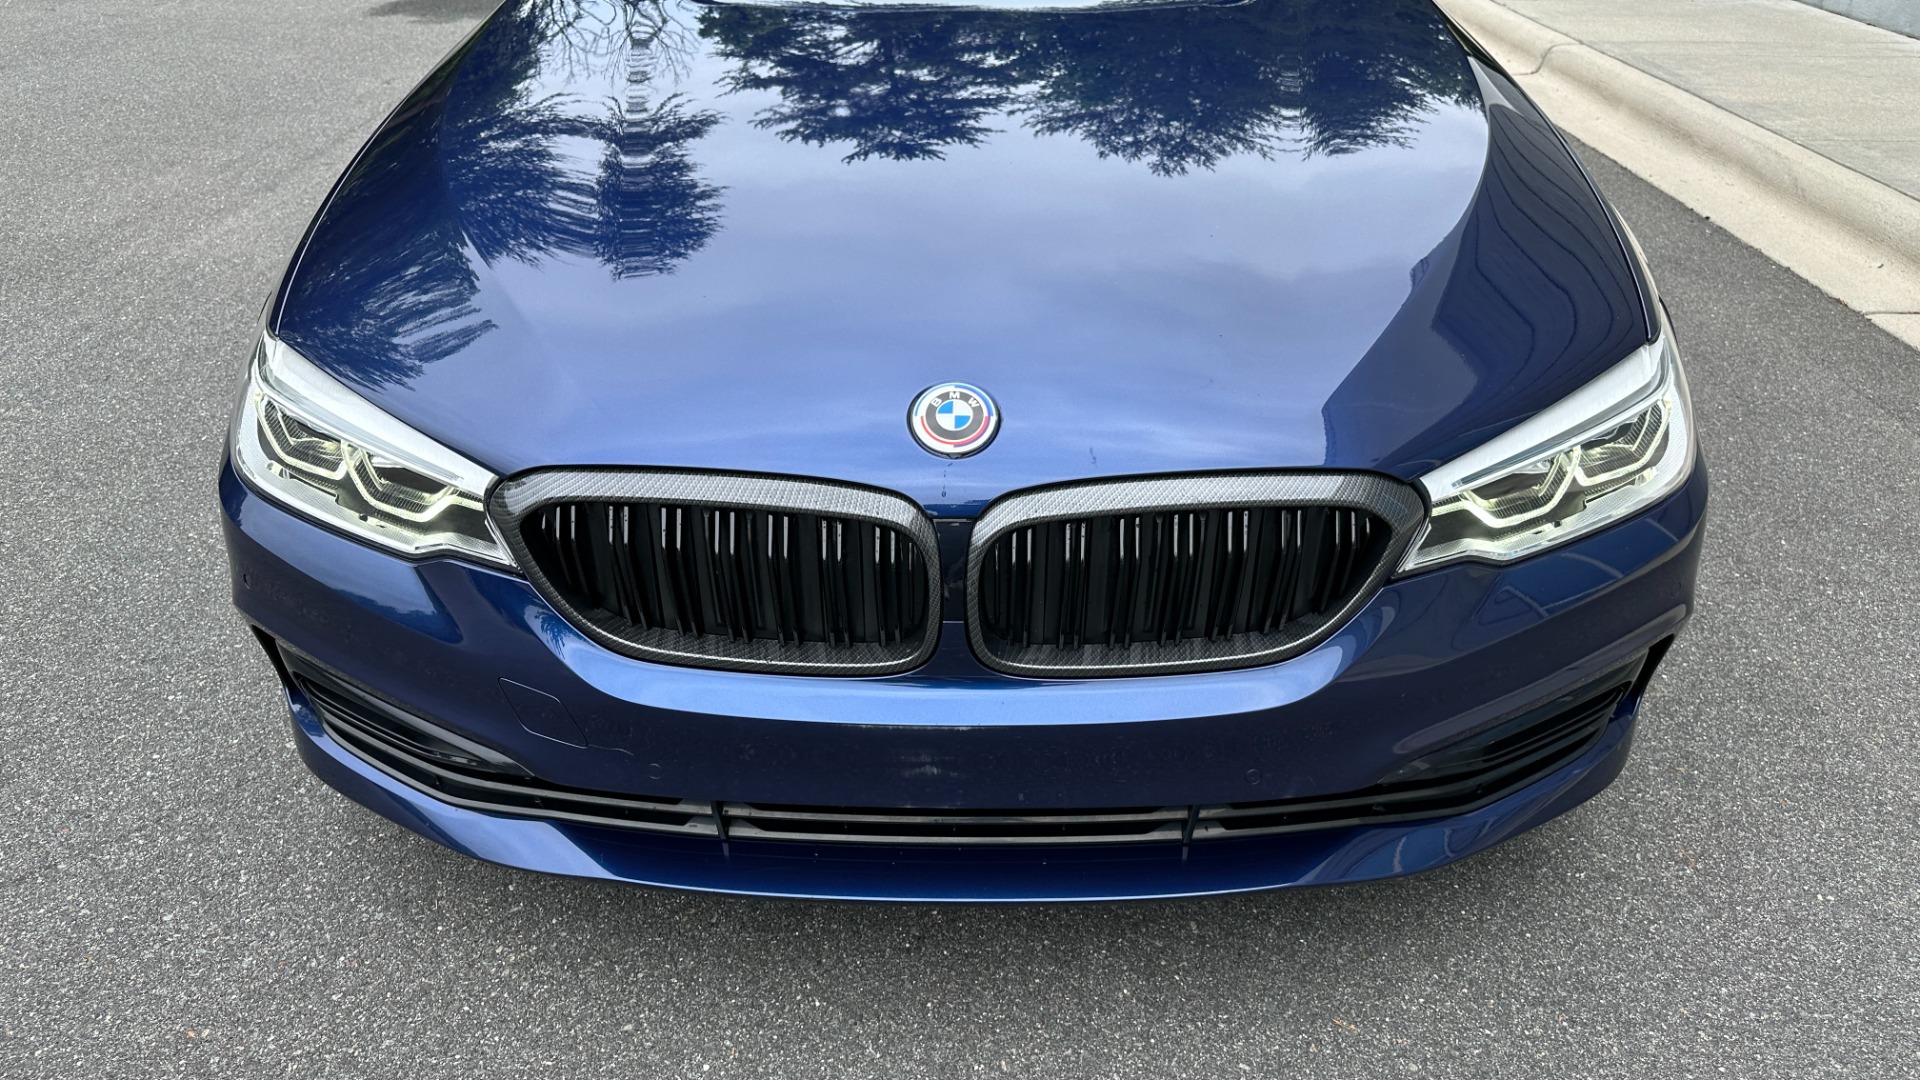 Used 2019 BMW 5 Series 530i / LIGHTING PACKAGE / CONVENIENCE PACKAGE / 19IN WHEELS for sale Sold at Formula Imports in Charlotte NC 28227 10